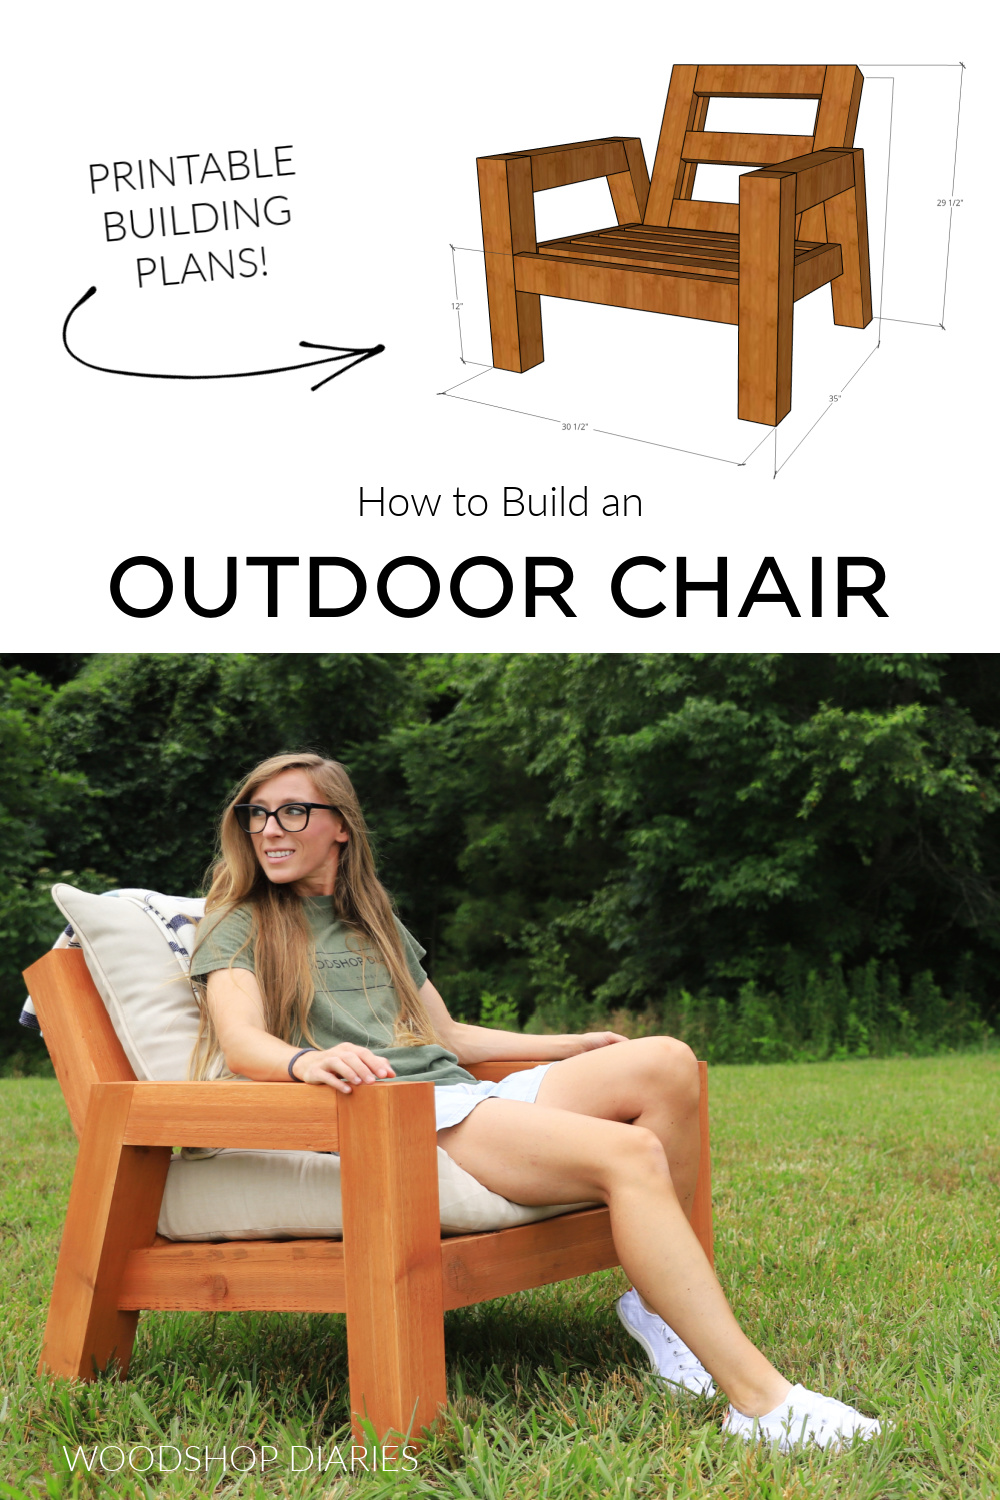 Pinterest collage image showing overall dimensional diagram of chair at top and Shara Woodshop Diaries sitting in chair at bottom with text "how to build an outdoor chair"